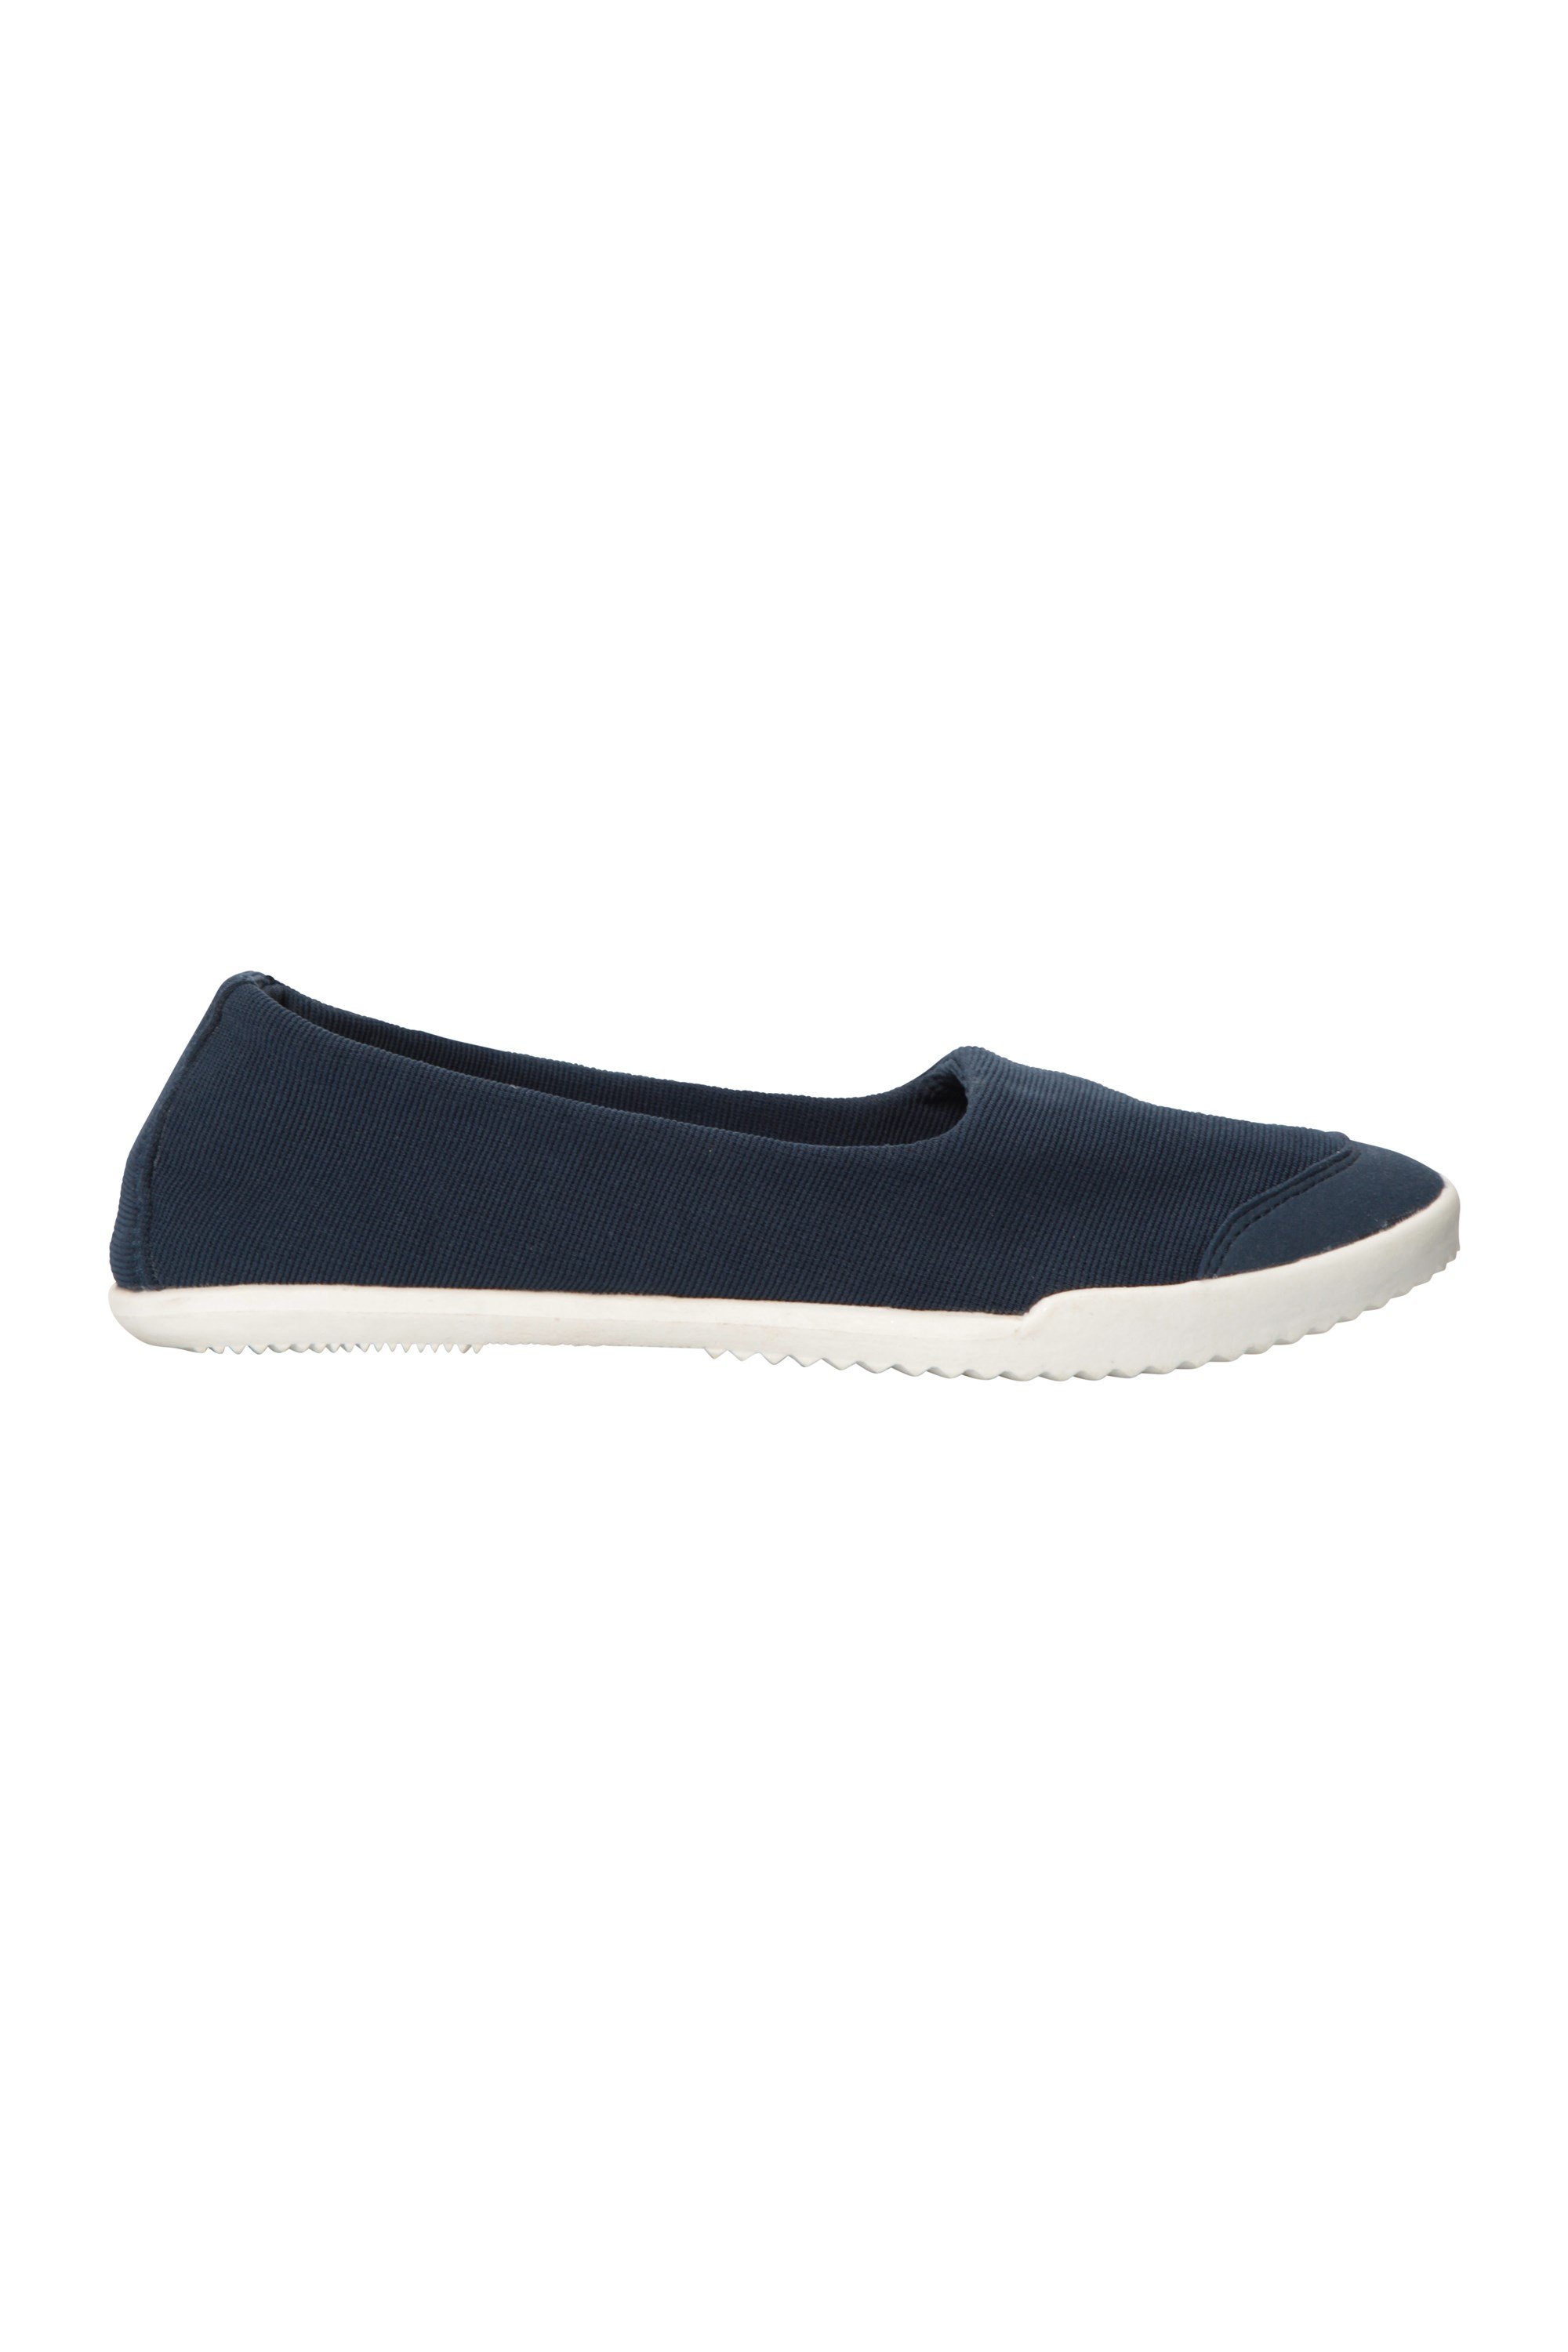 BOWNESS CASUAL WOMENS SHOE